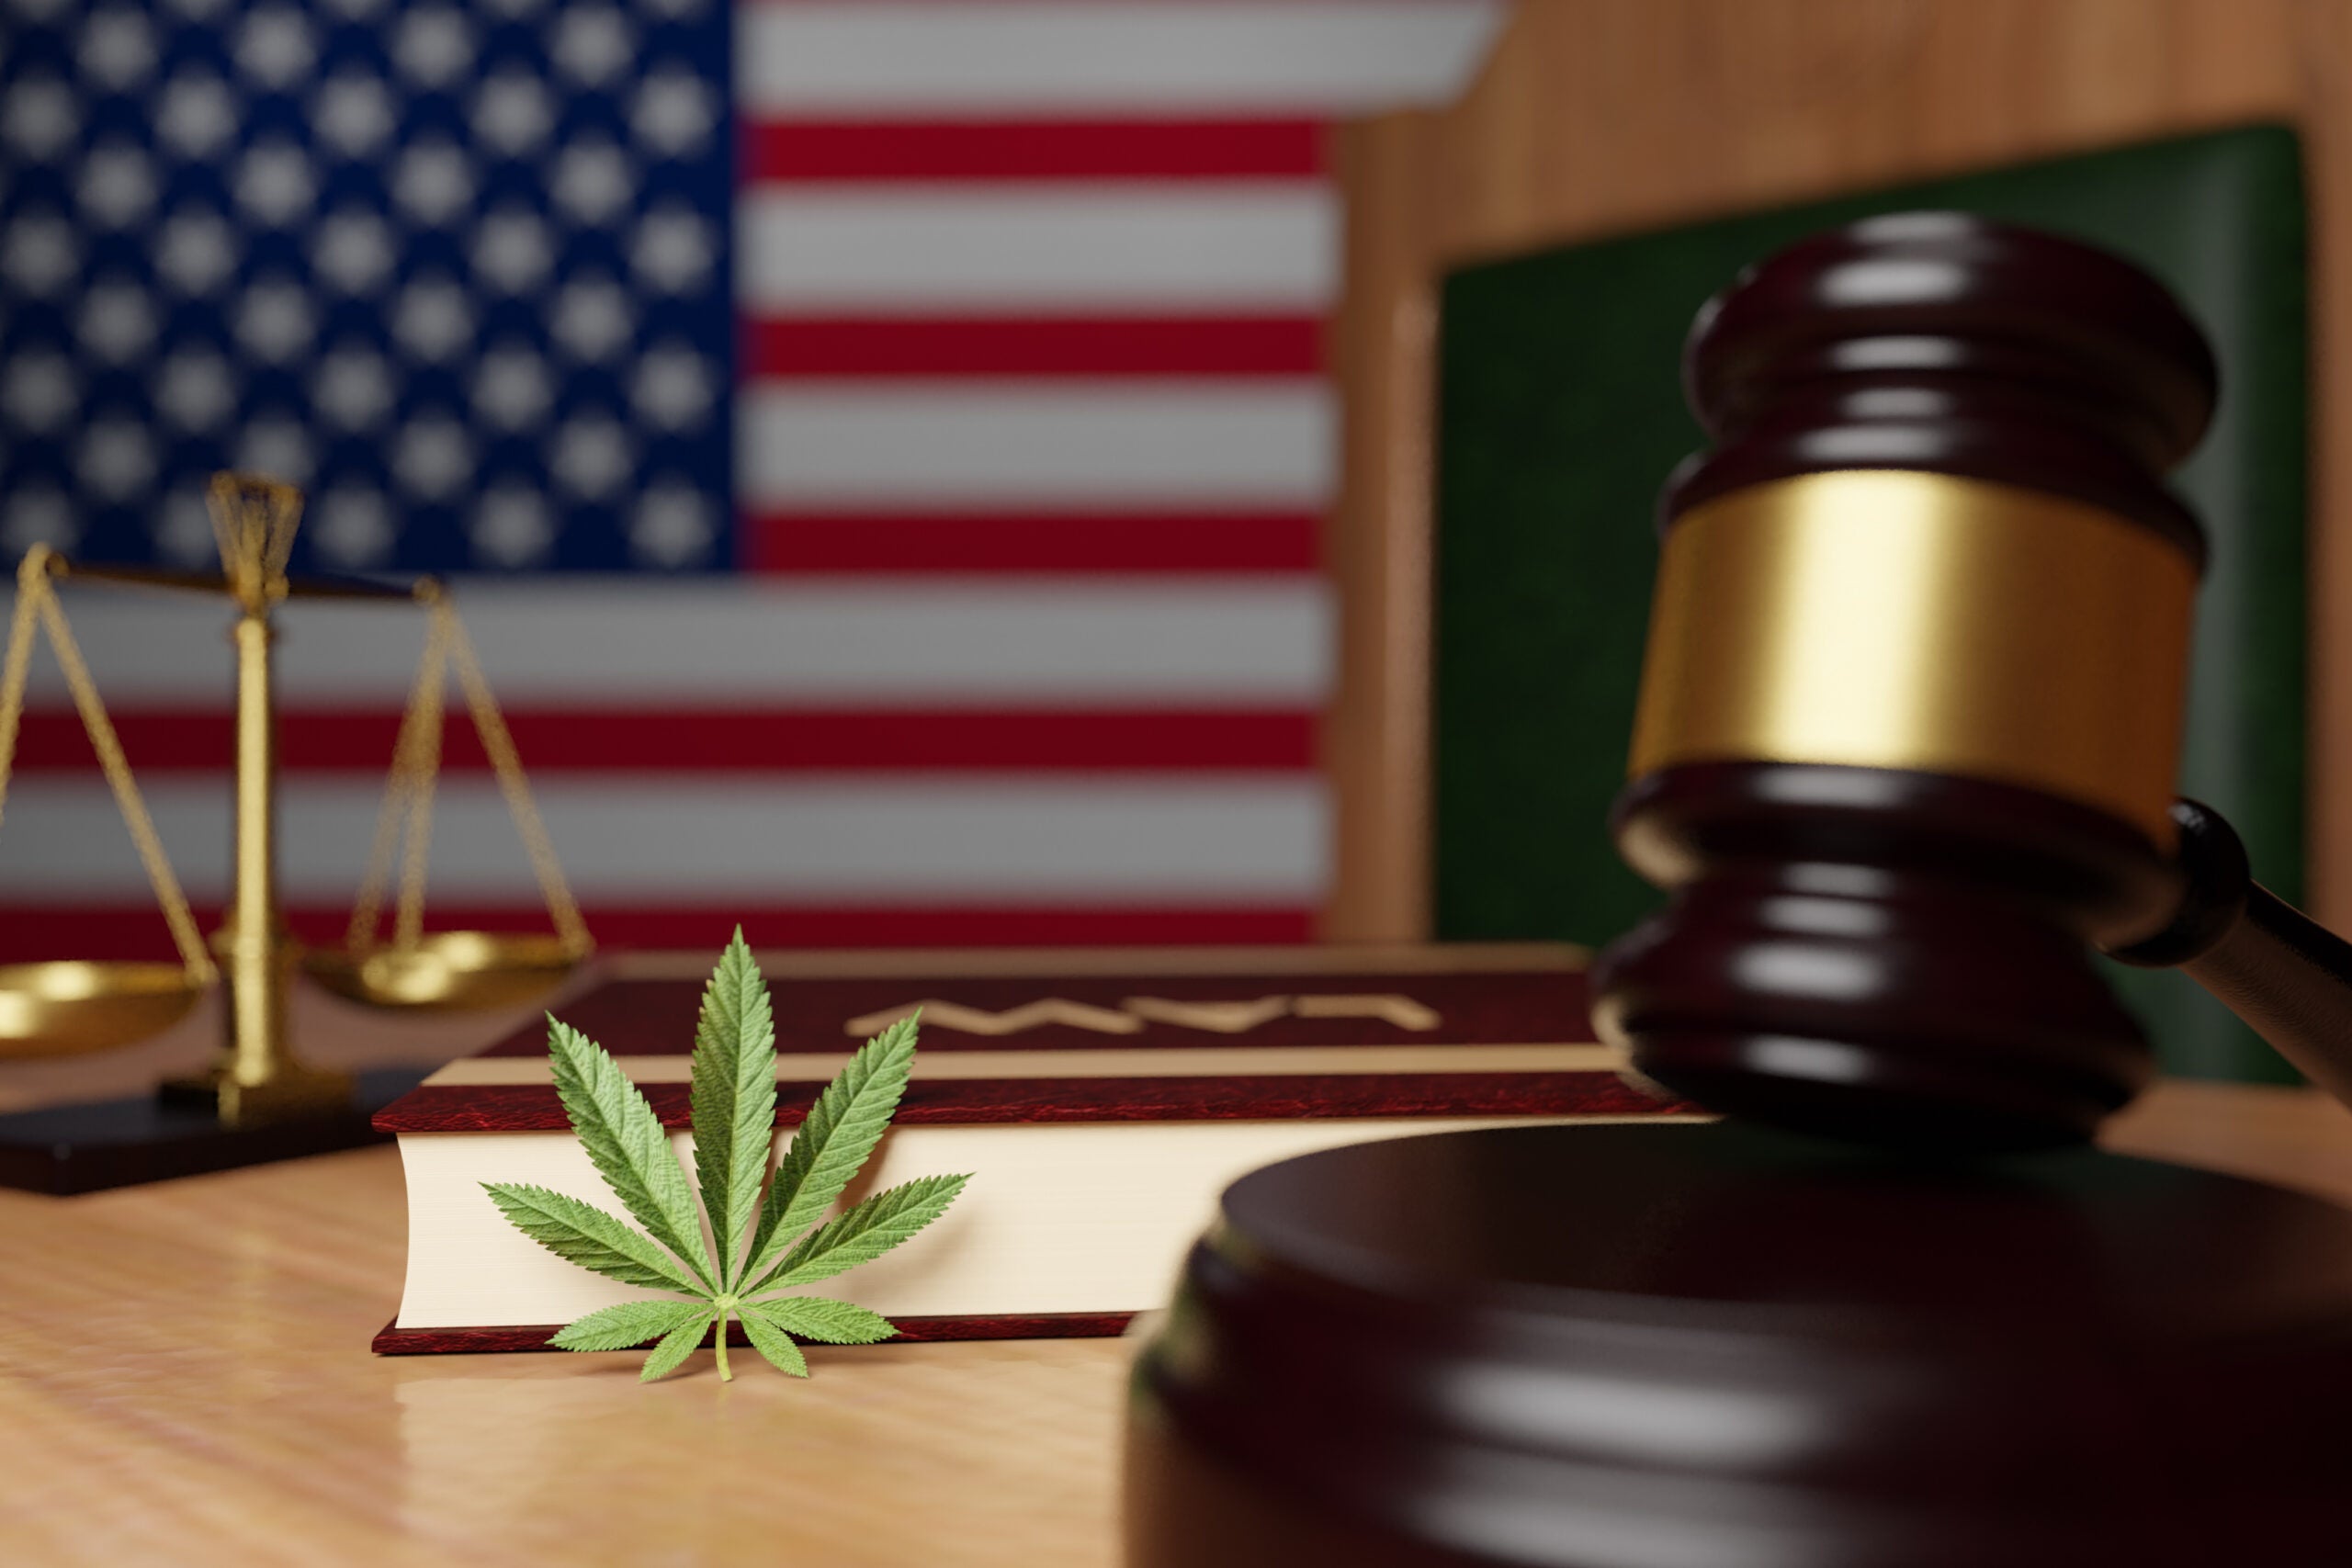 Michigan Ends Medical Cannabis Licensing Ban For Those With Previous Marijuana Convictions